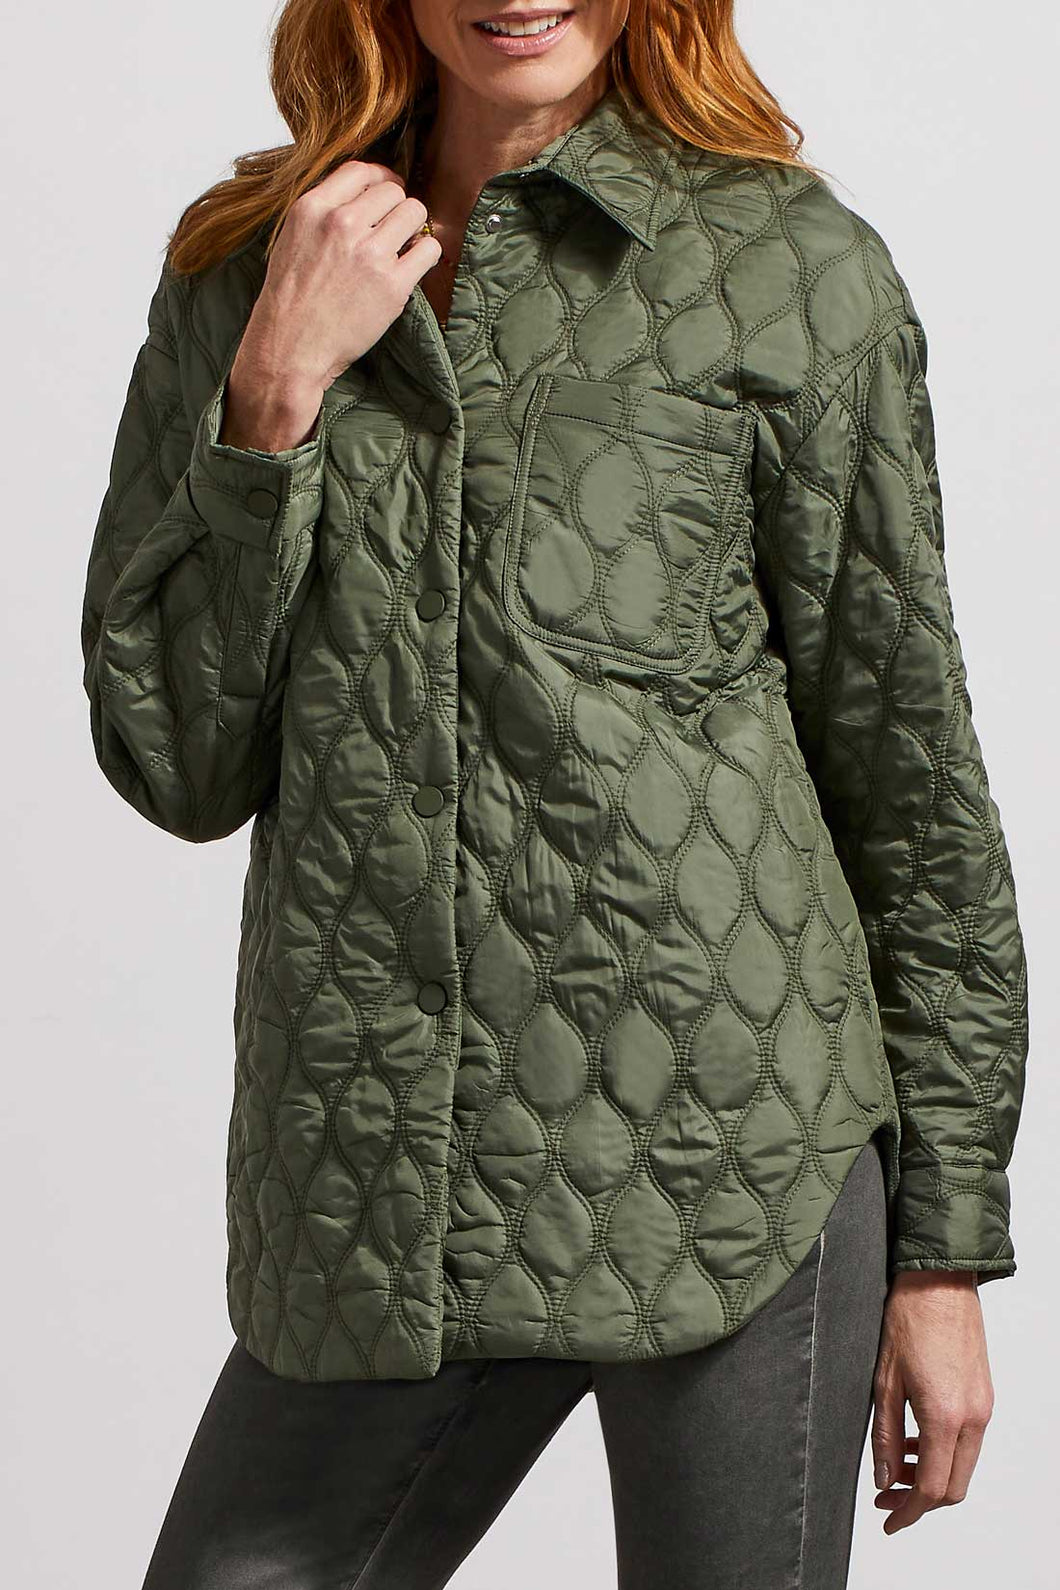 TF- Cedar Quilted Jacket